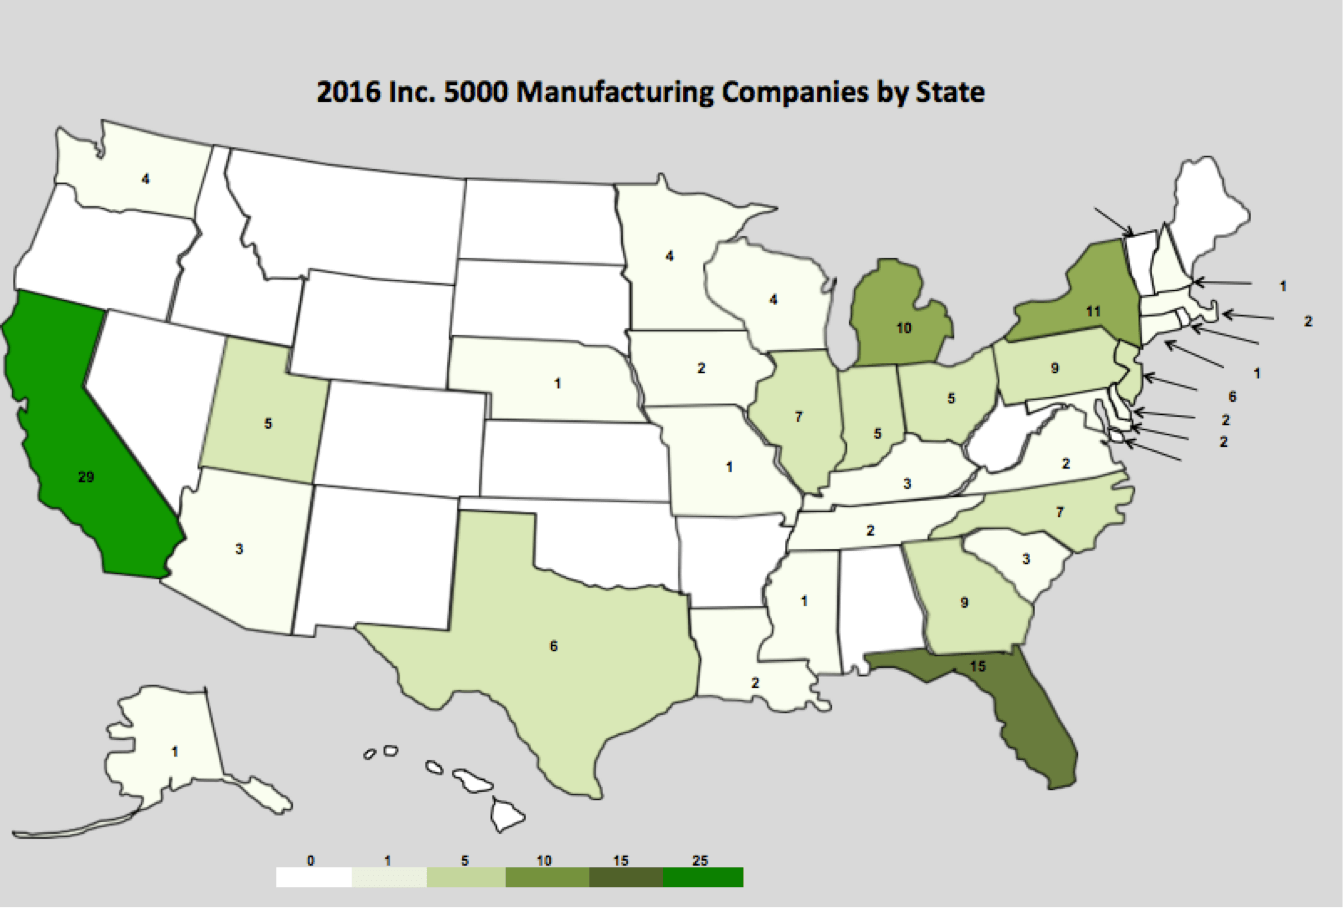 Inc. 5000 Manufacturing Companies by State